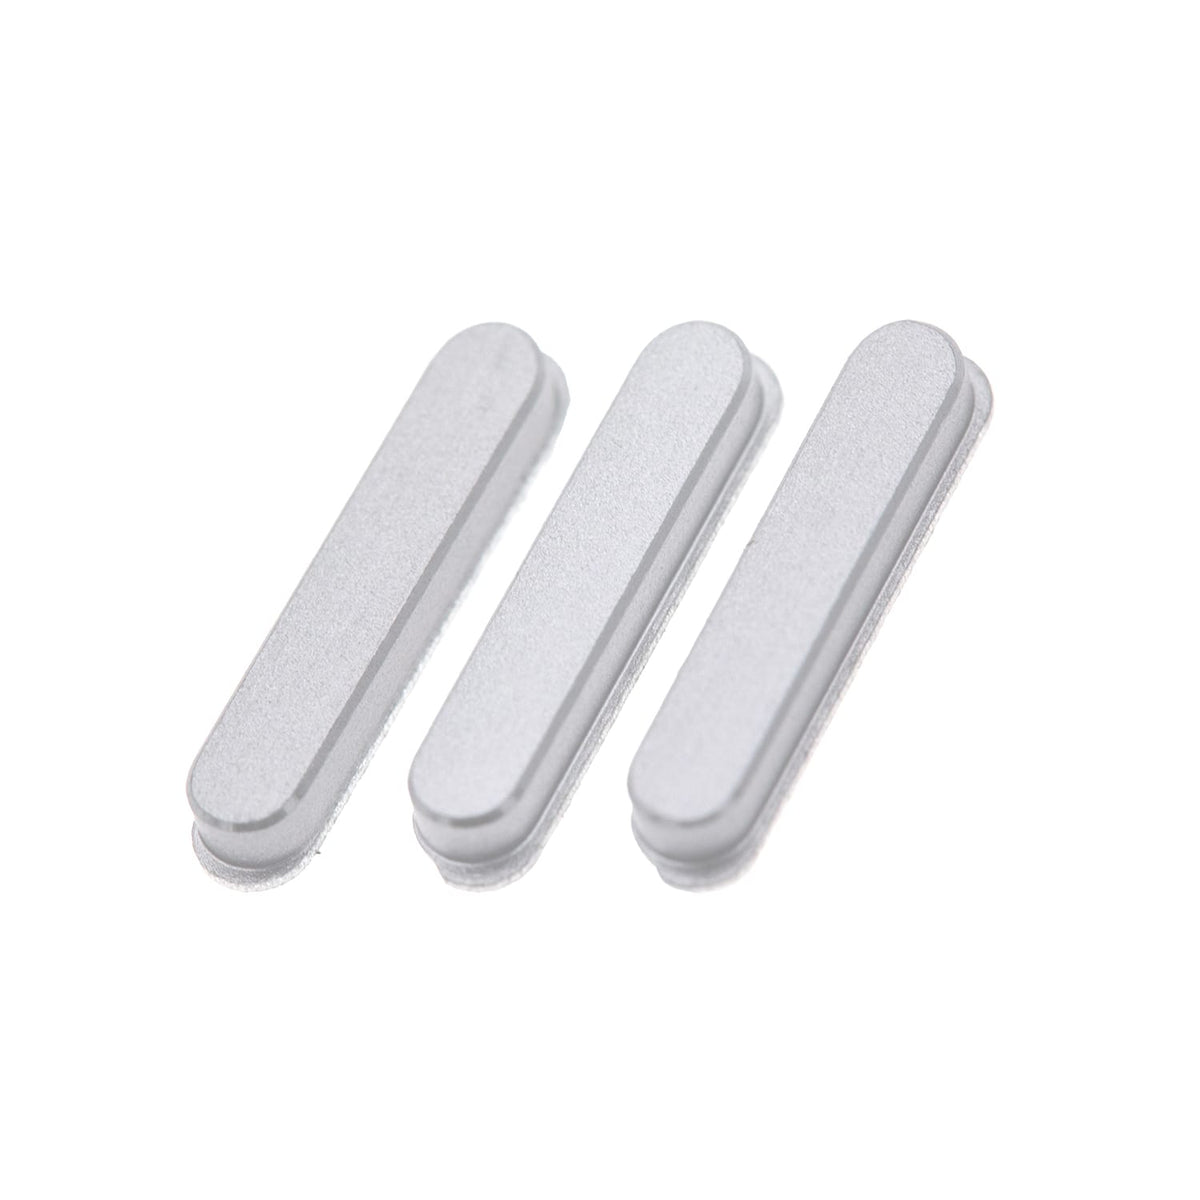 SIDE BUTTON SET FOR IPAD PRO 10.5/12.9 2ND/AIR 3 (3PCS/SET) - SILVER